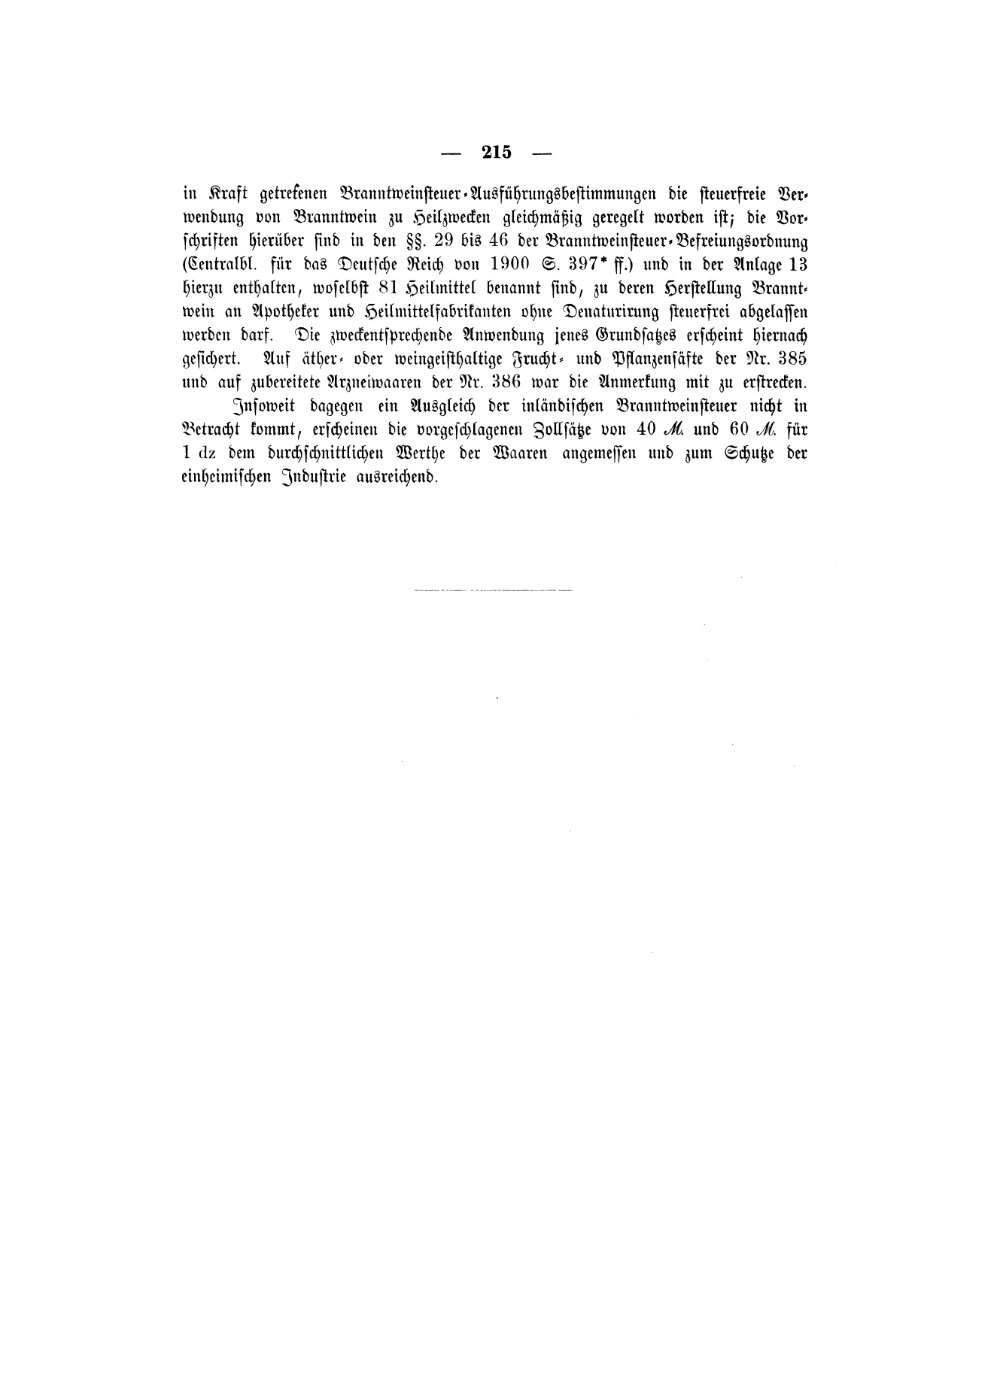 Scan of page 215